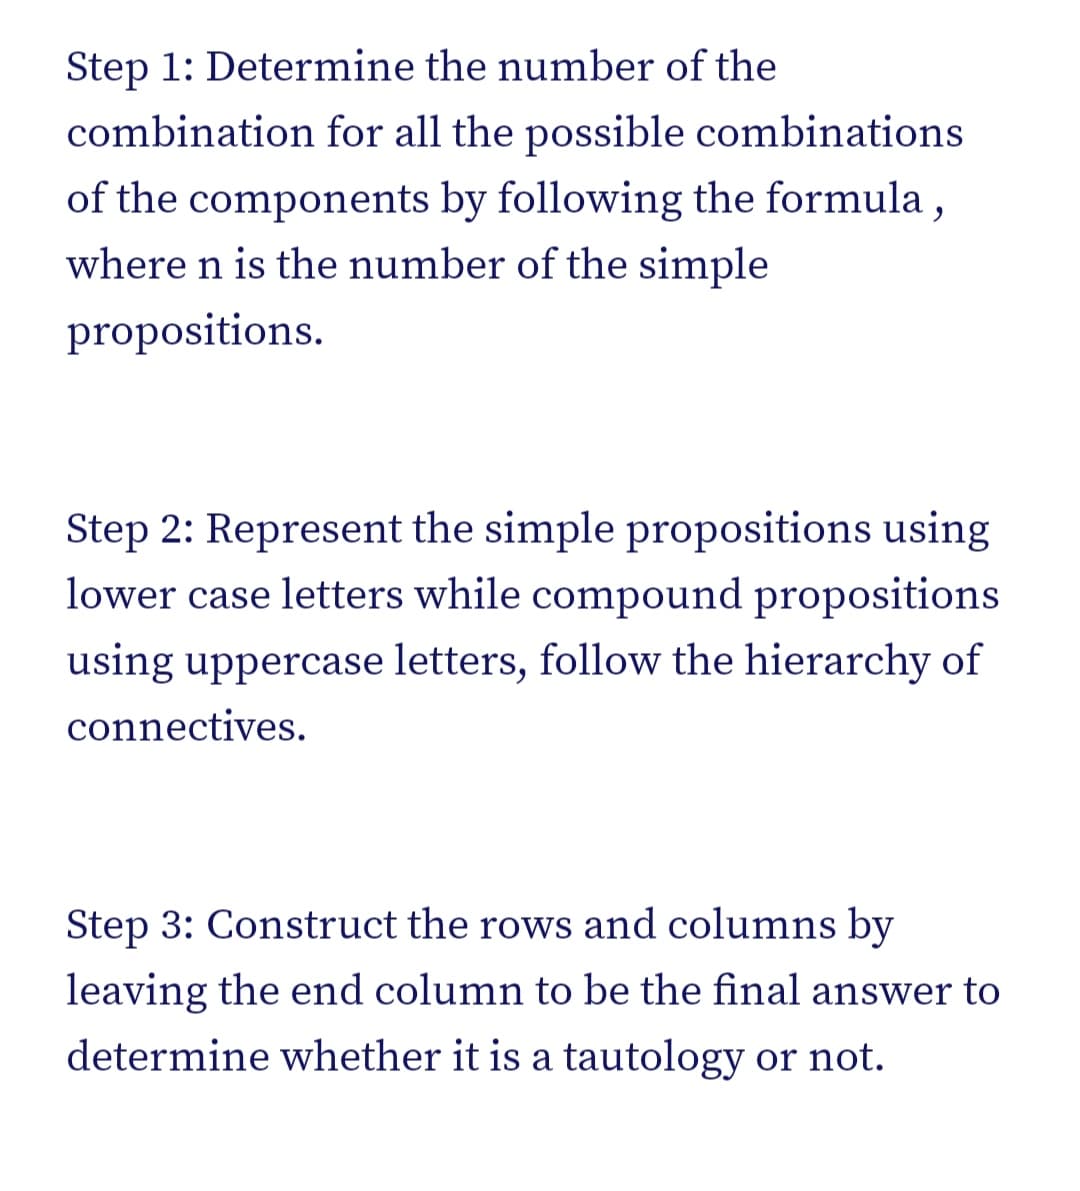 Step 1: Determine the number of the
combination for all the possible combinations
of the components by following the formula ,
where n is the number of the simple
propositions.
Step 2: Represent the simple propositions using
lower case letters while compound propositions
using uppercase letters, follow the hierarchy of
connectives.
Step 3: Construct the rows and columns by
leaving the end column to be the final answer to
determine whether it is a tautology or not.
